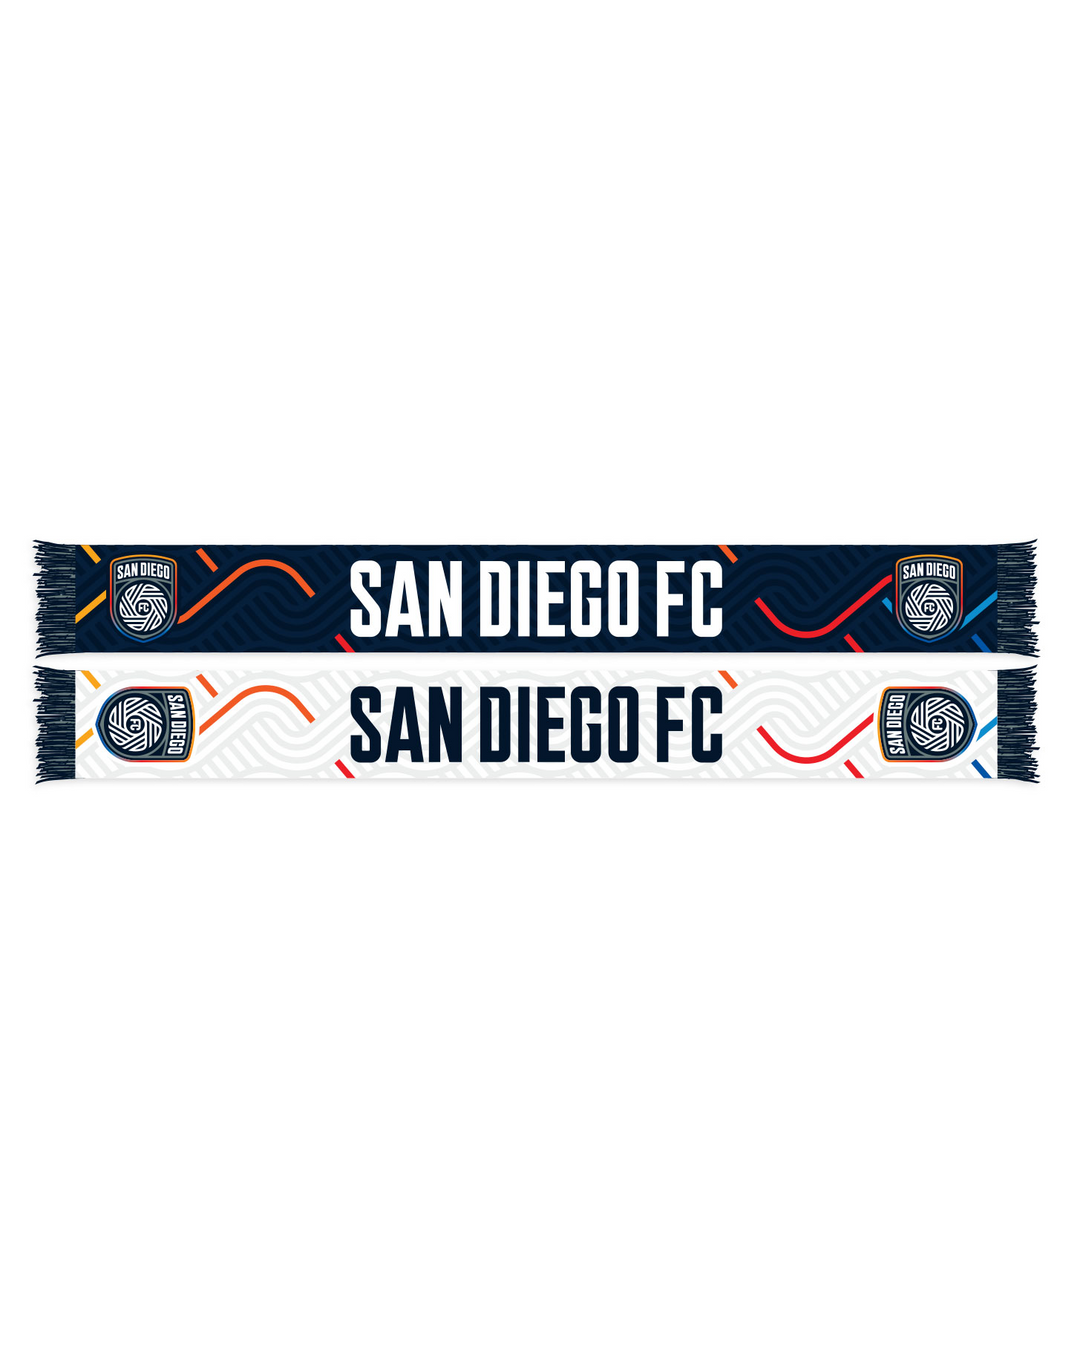 San Diego FC "Woven Into One" Scarf w/ Community Colors